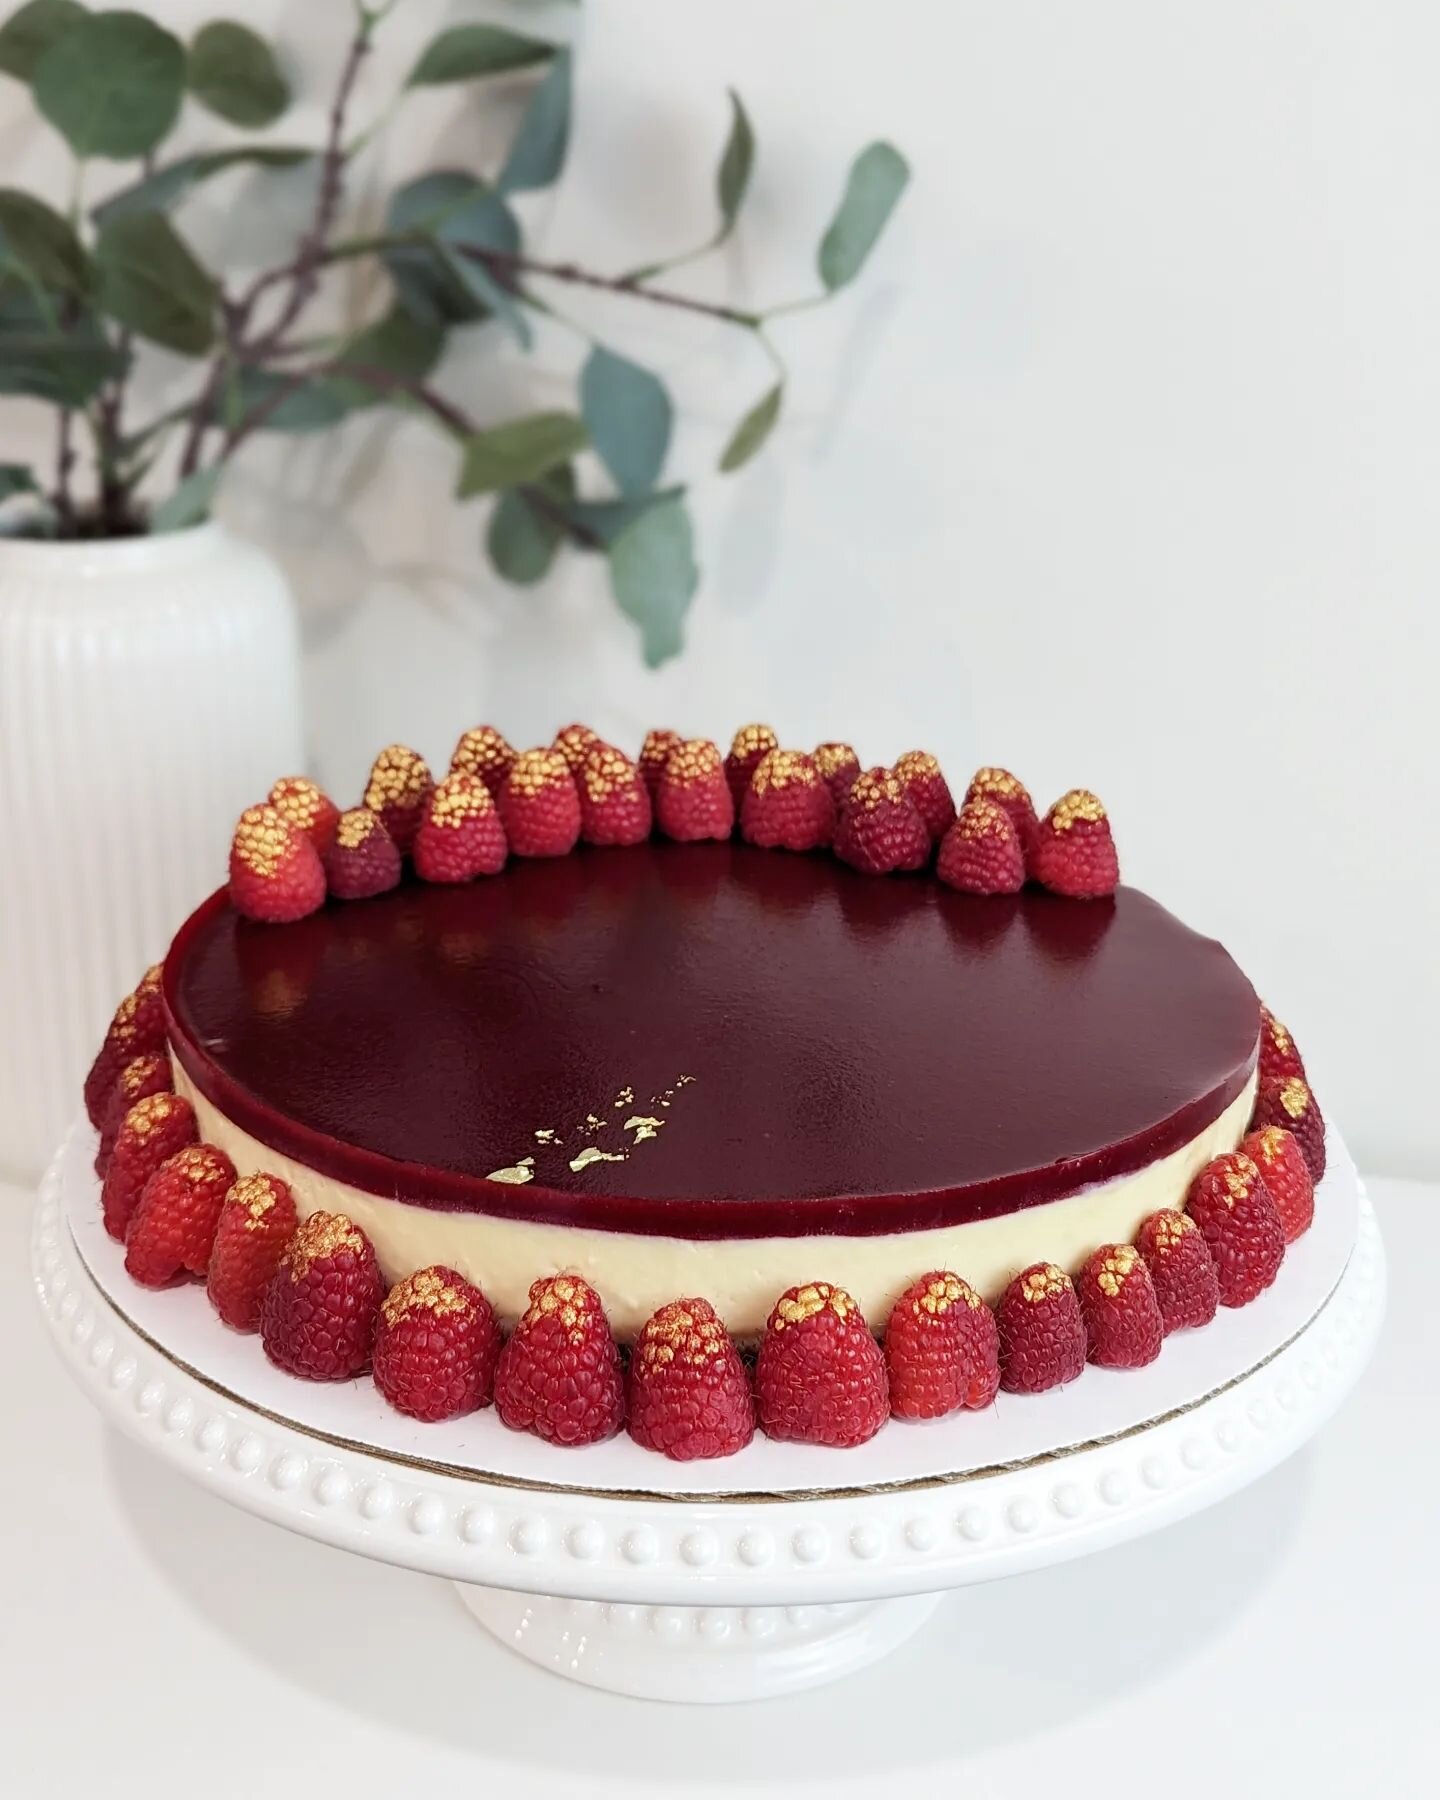 White chocolate and raspberry cheesecake as requested by my big sister for her birthday today! ❤️ Always love getting to play around and experiment with new designs when it's a family birthday and I am so excited with how this cake came out 🥰😍also 